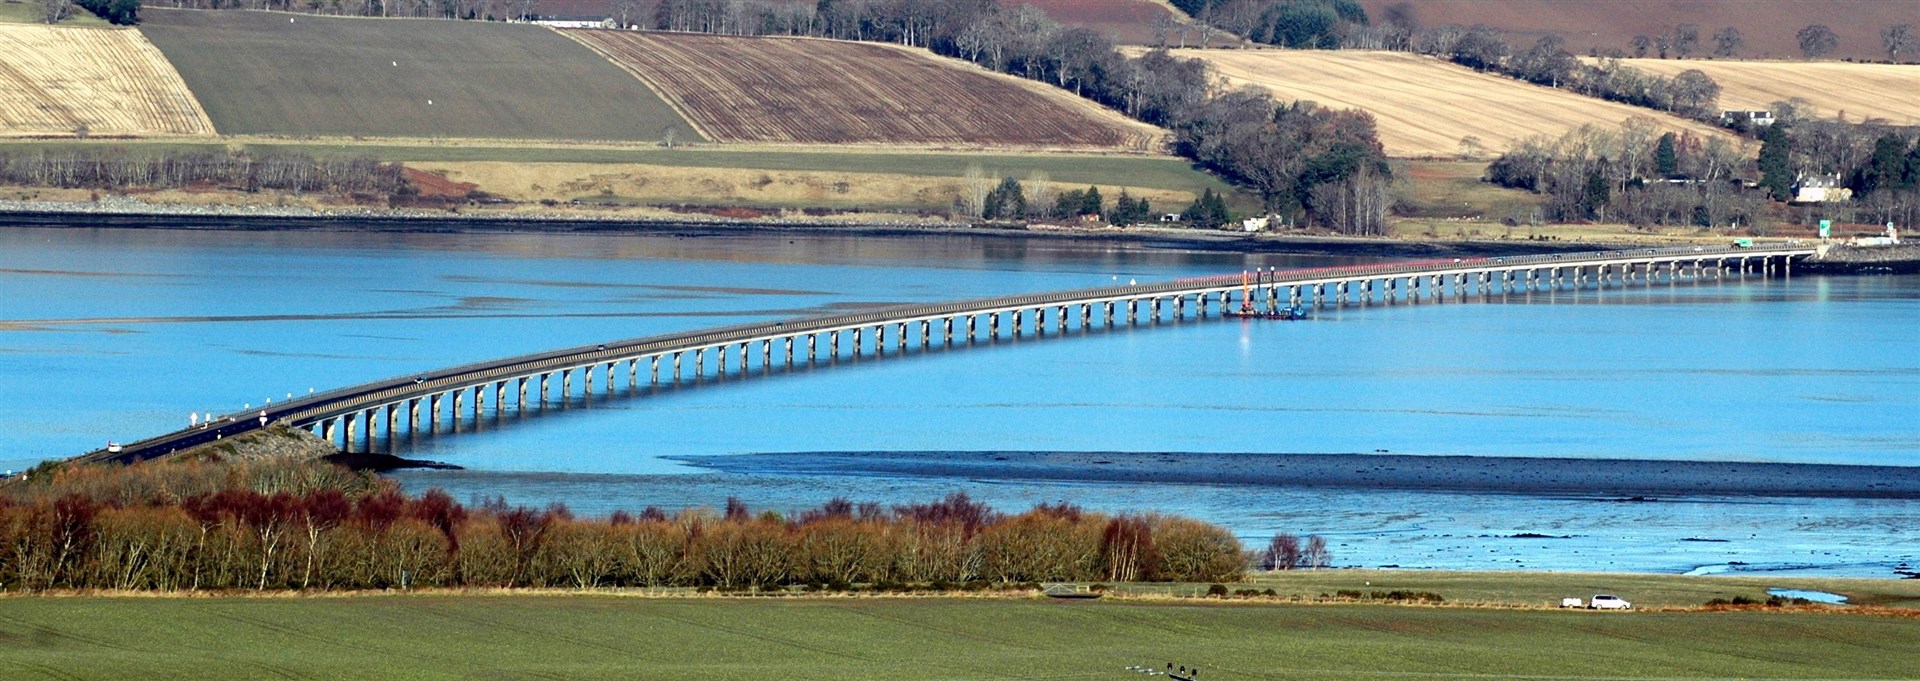 The Cromarty Bridge. The collision occurred at the southern end of the bridge.